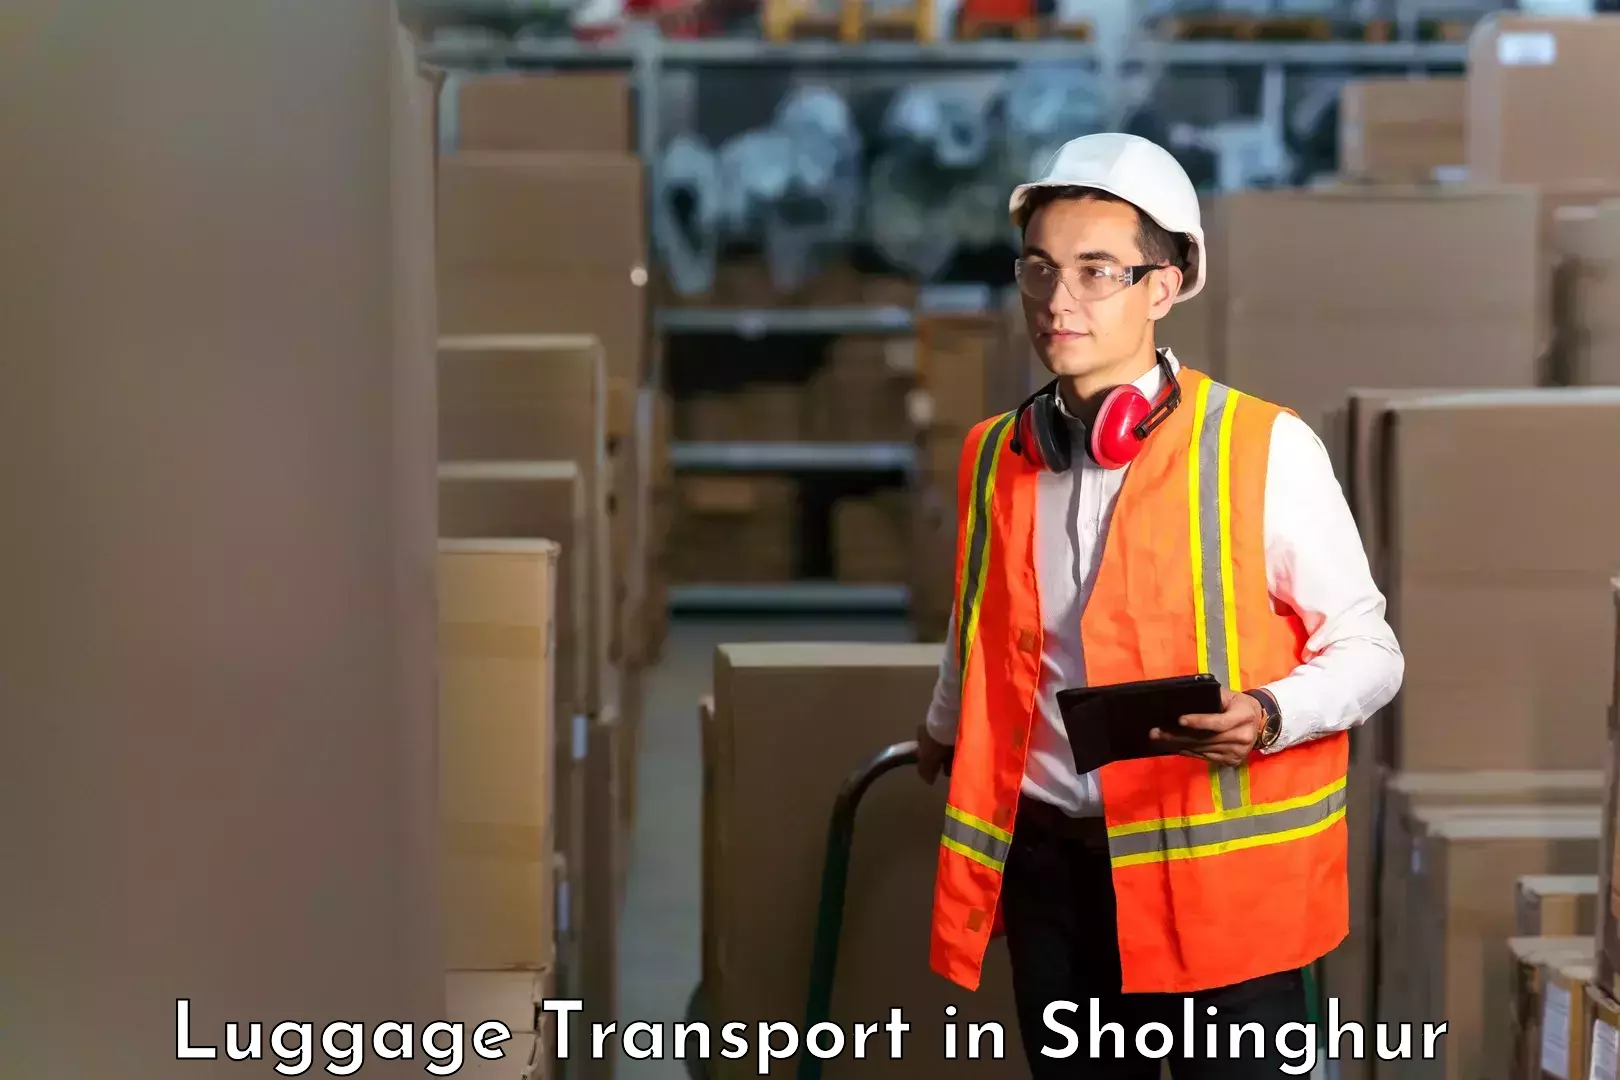 Luggage storage and delivery in Sholinghur